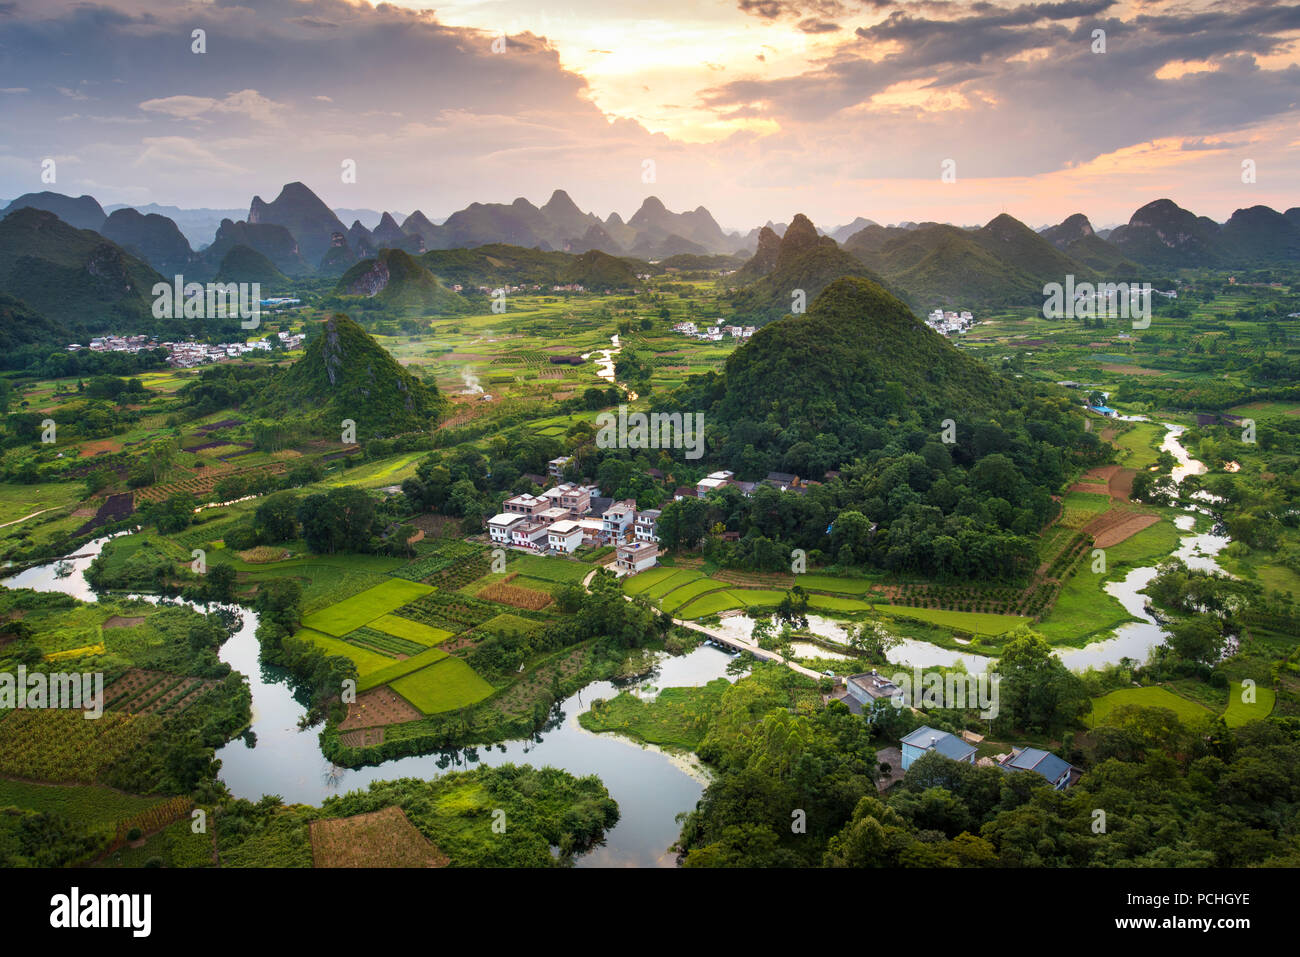 Stunning sunset over karst formations and rice fields landscape near Yangshuo in Guangxi province of China Stock Photo